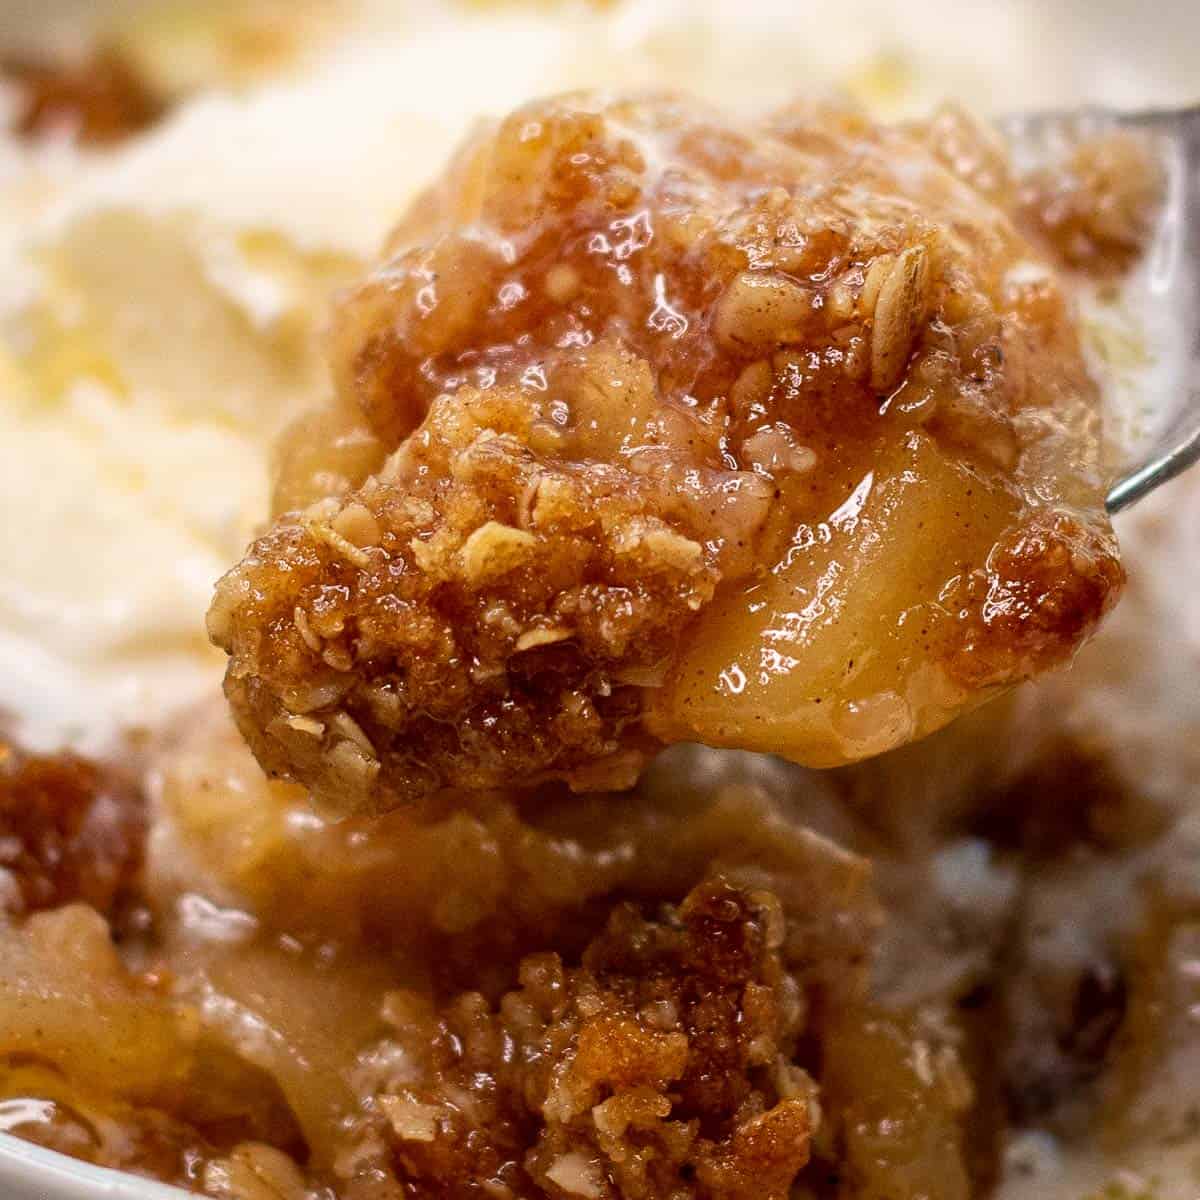 Image showing a close up of a spoonful of apple crisp.